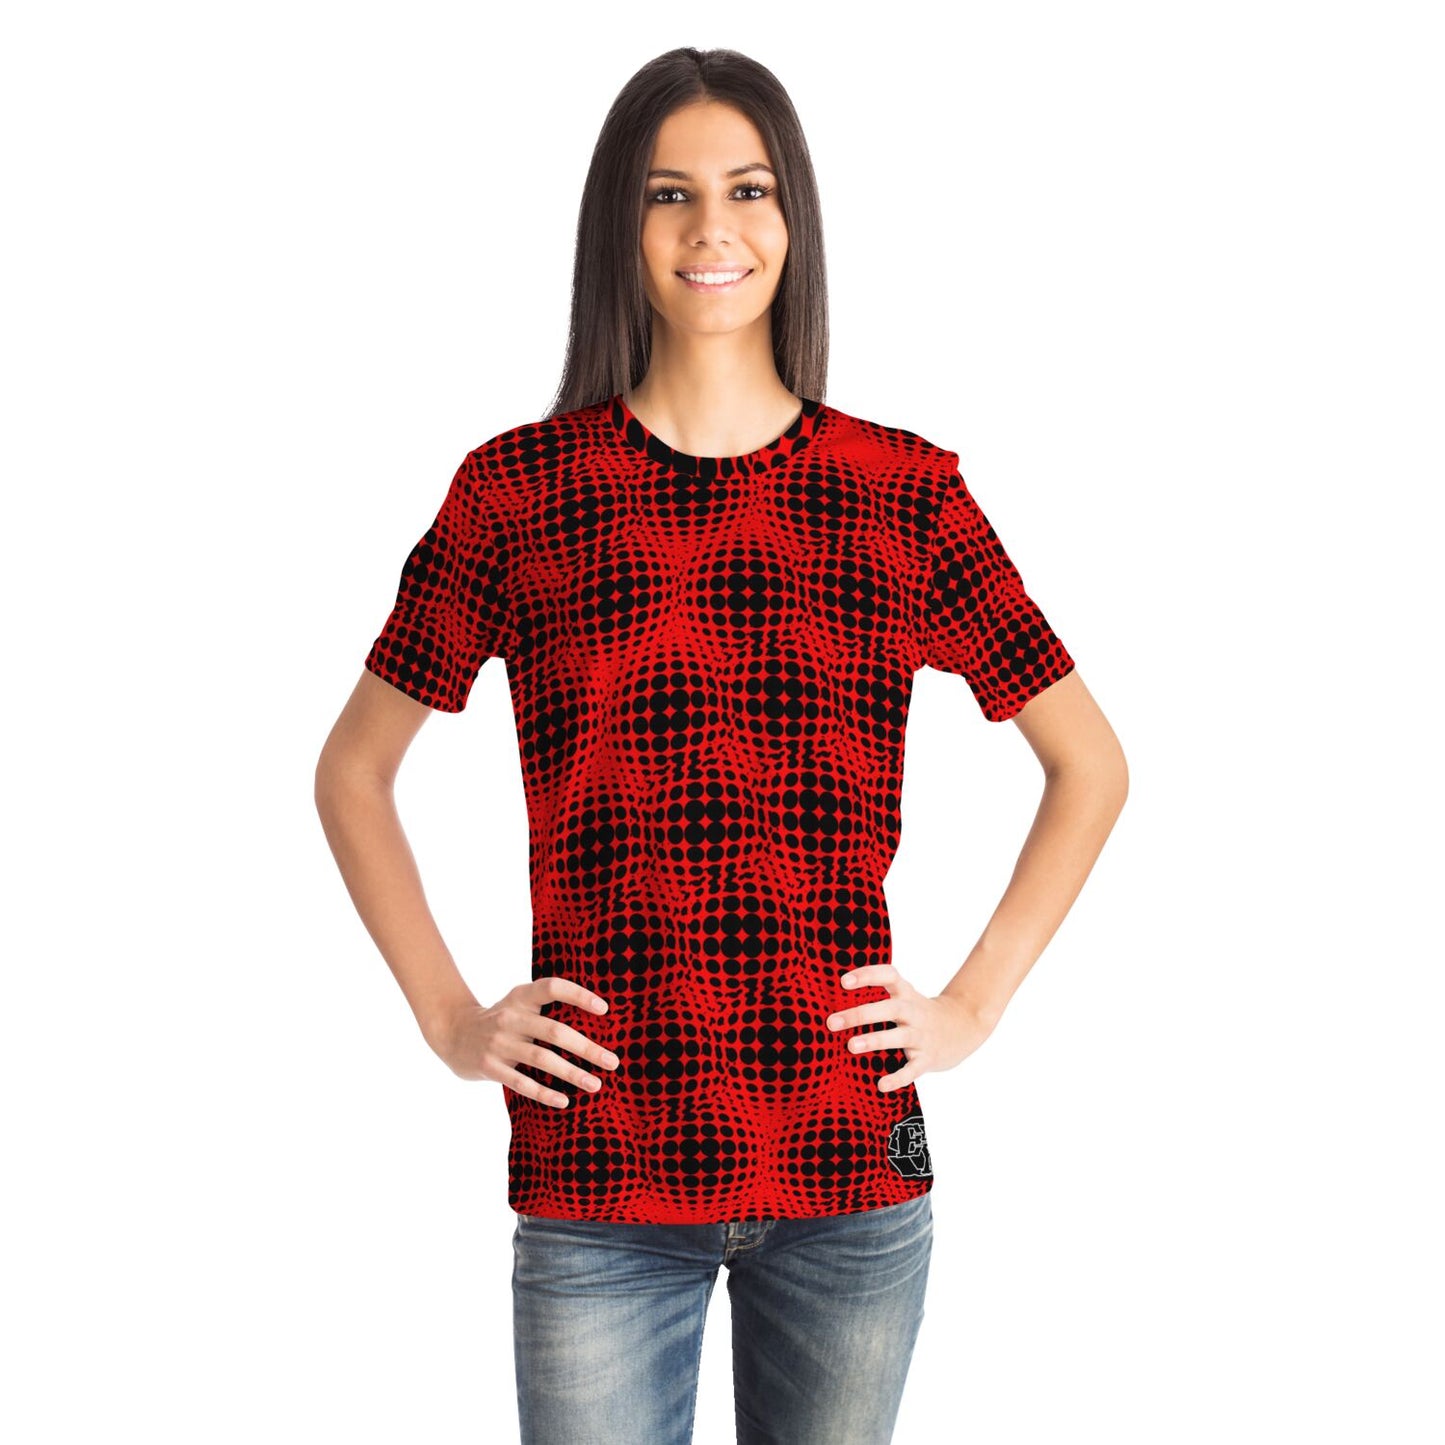 EYS - Dotted Sphere Pattern Red and Black Color Shirt